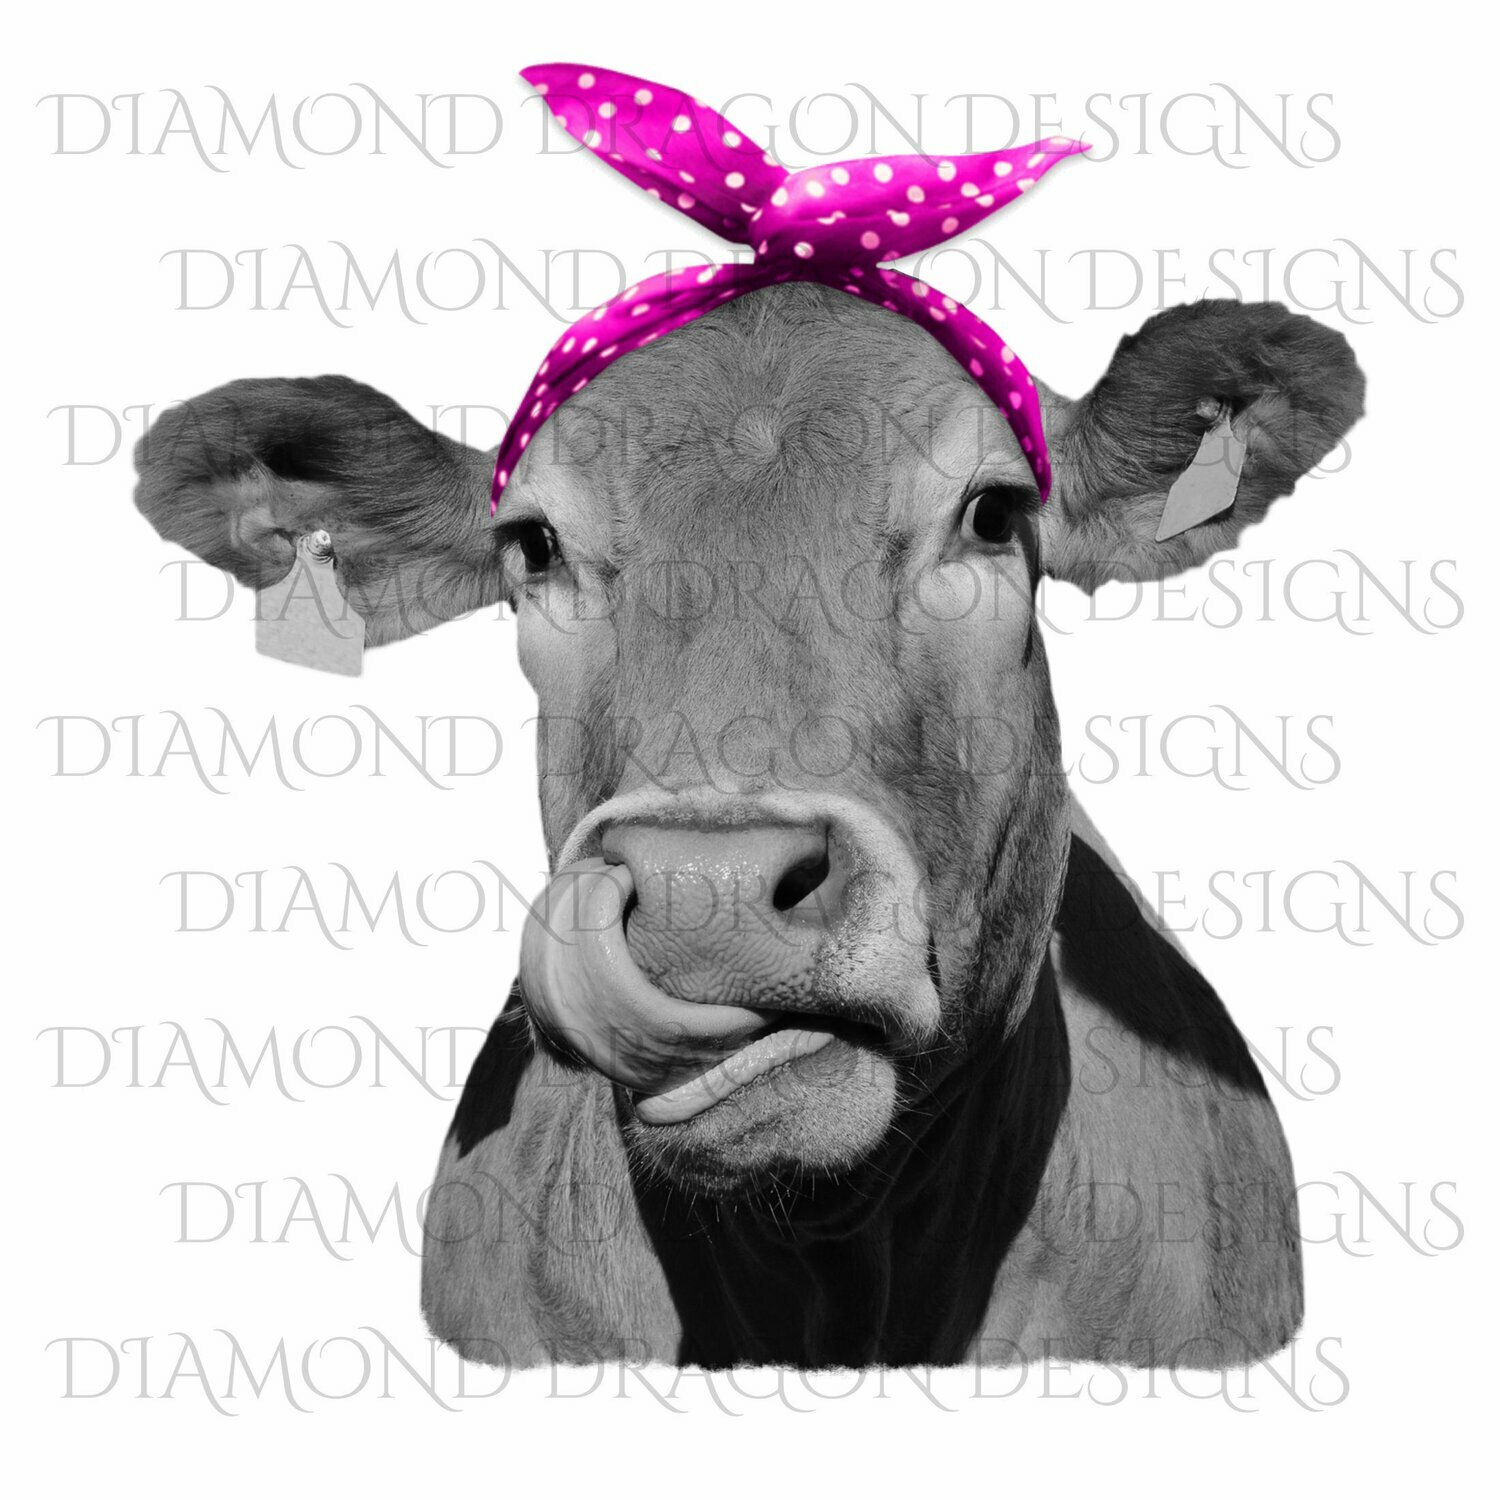 Cows - Heifer, Cute Cow with Pink Polkadot Bandana, Cowlick, Cow Tongue Out, Digital Image